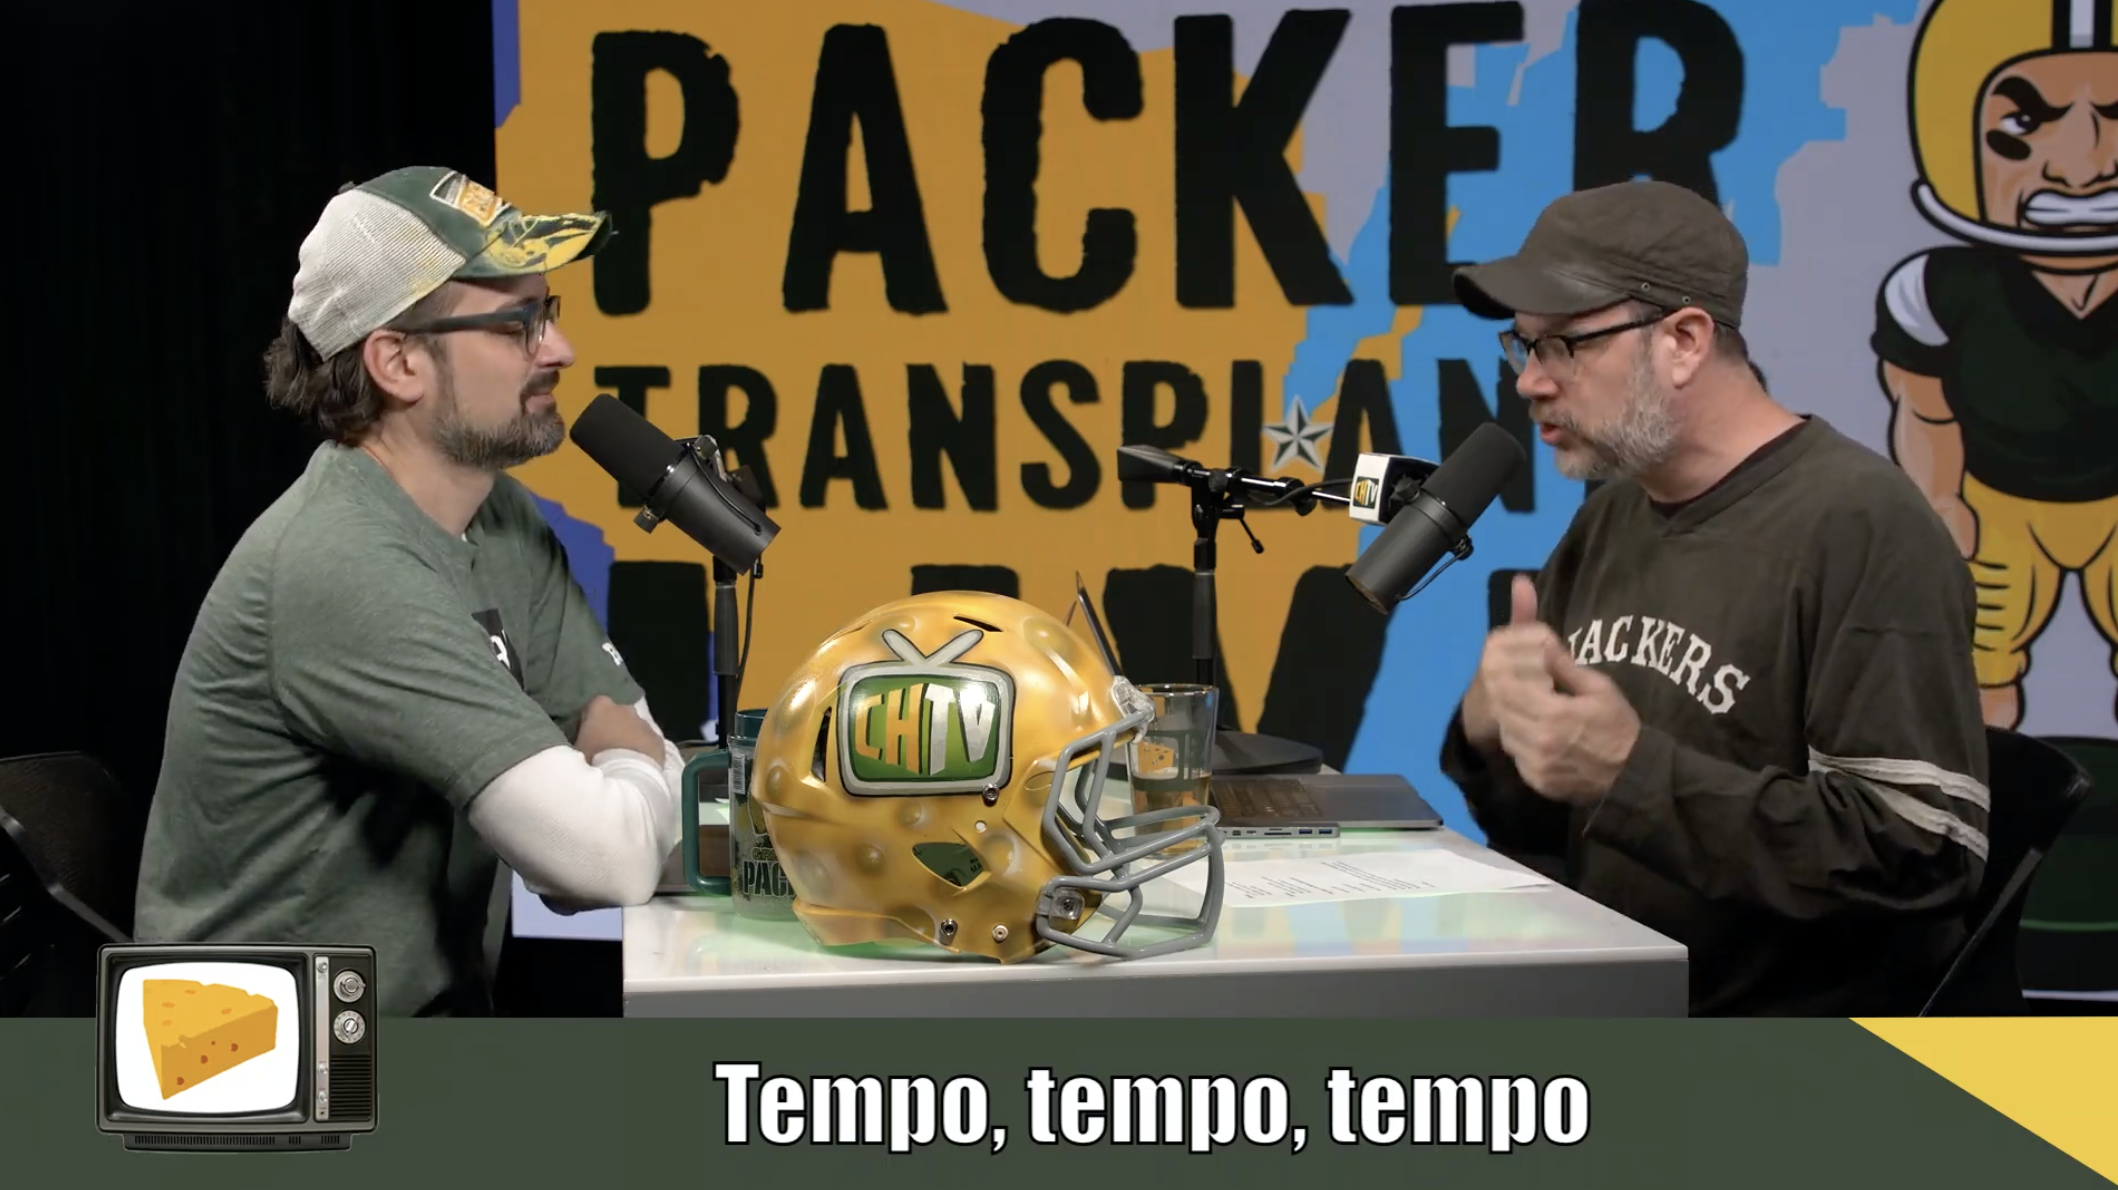 Packer Transplants 187: Bring on the 49ers2118 x 1190